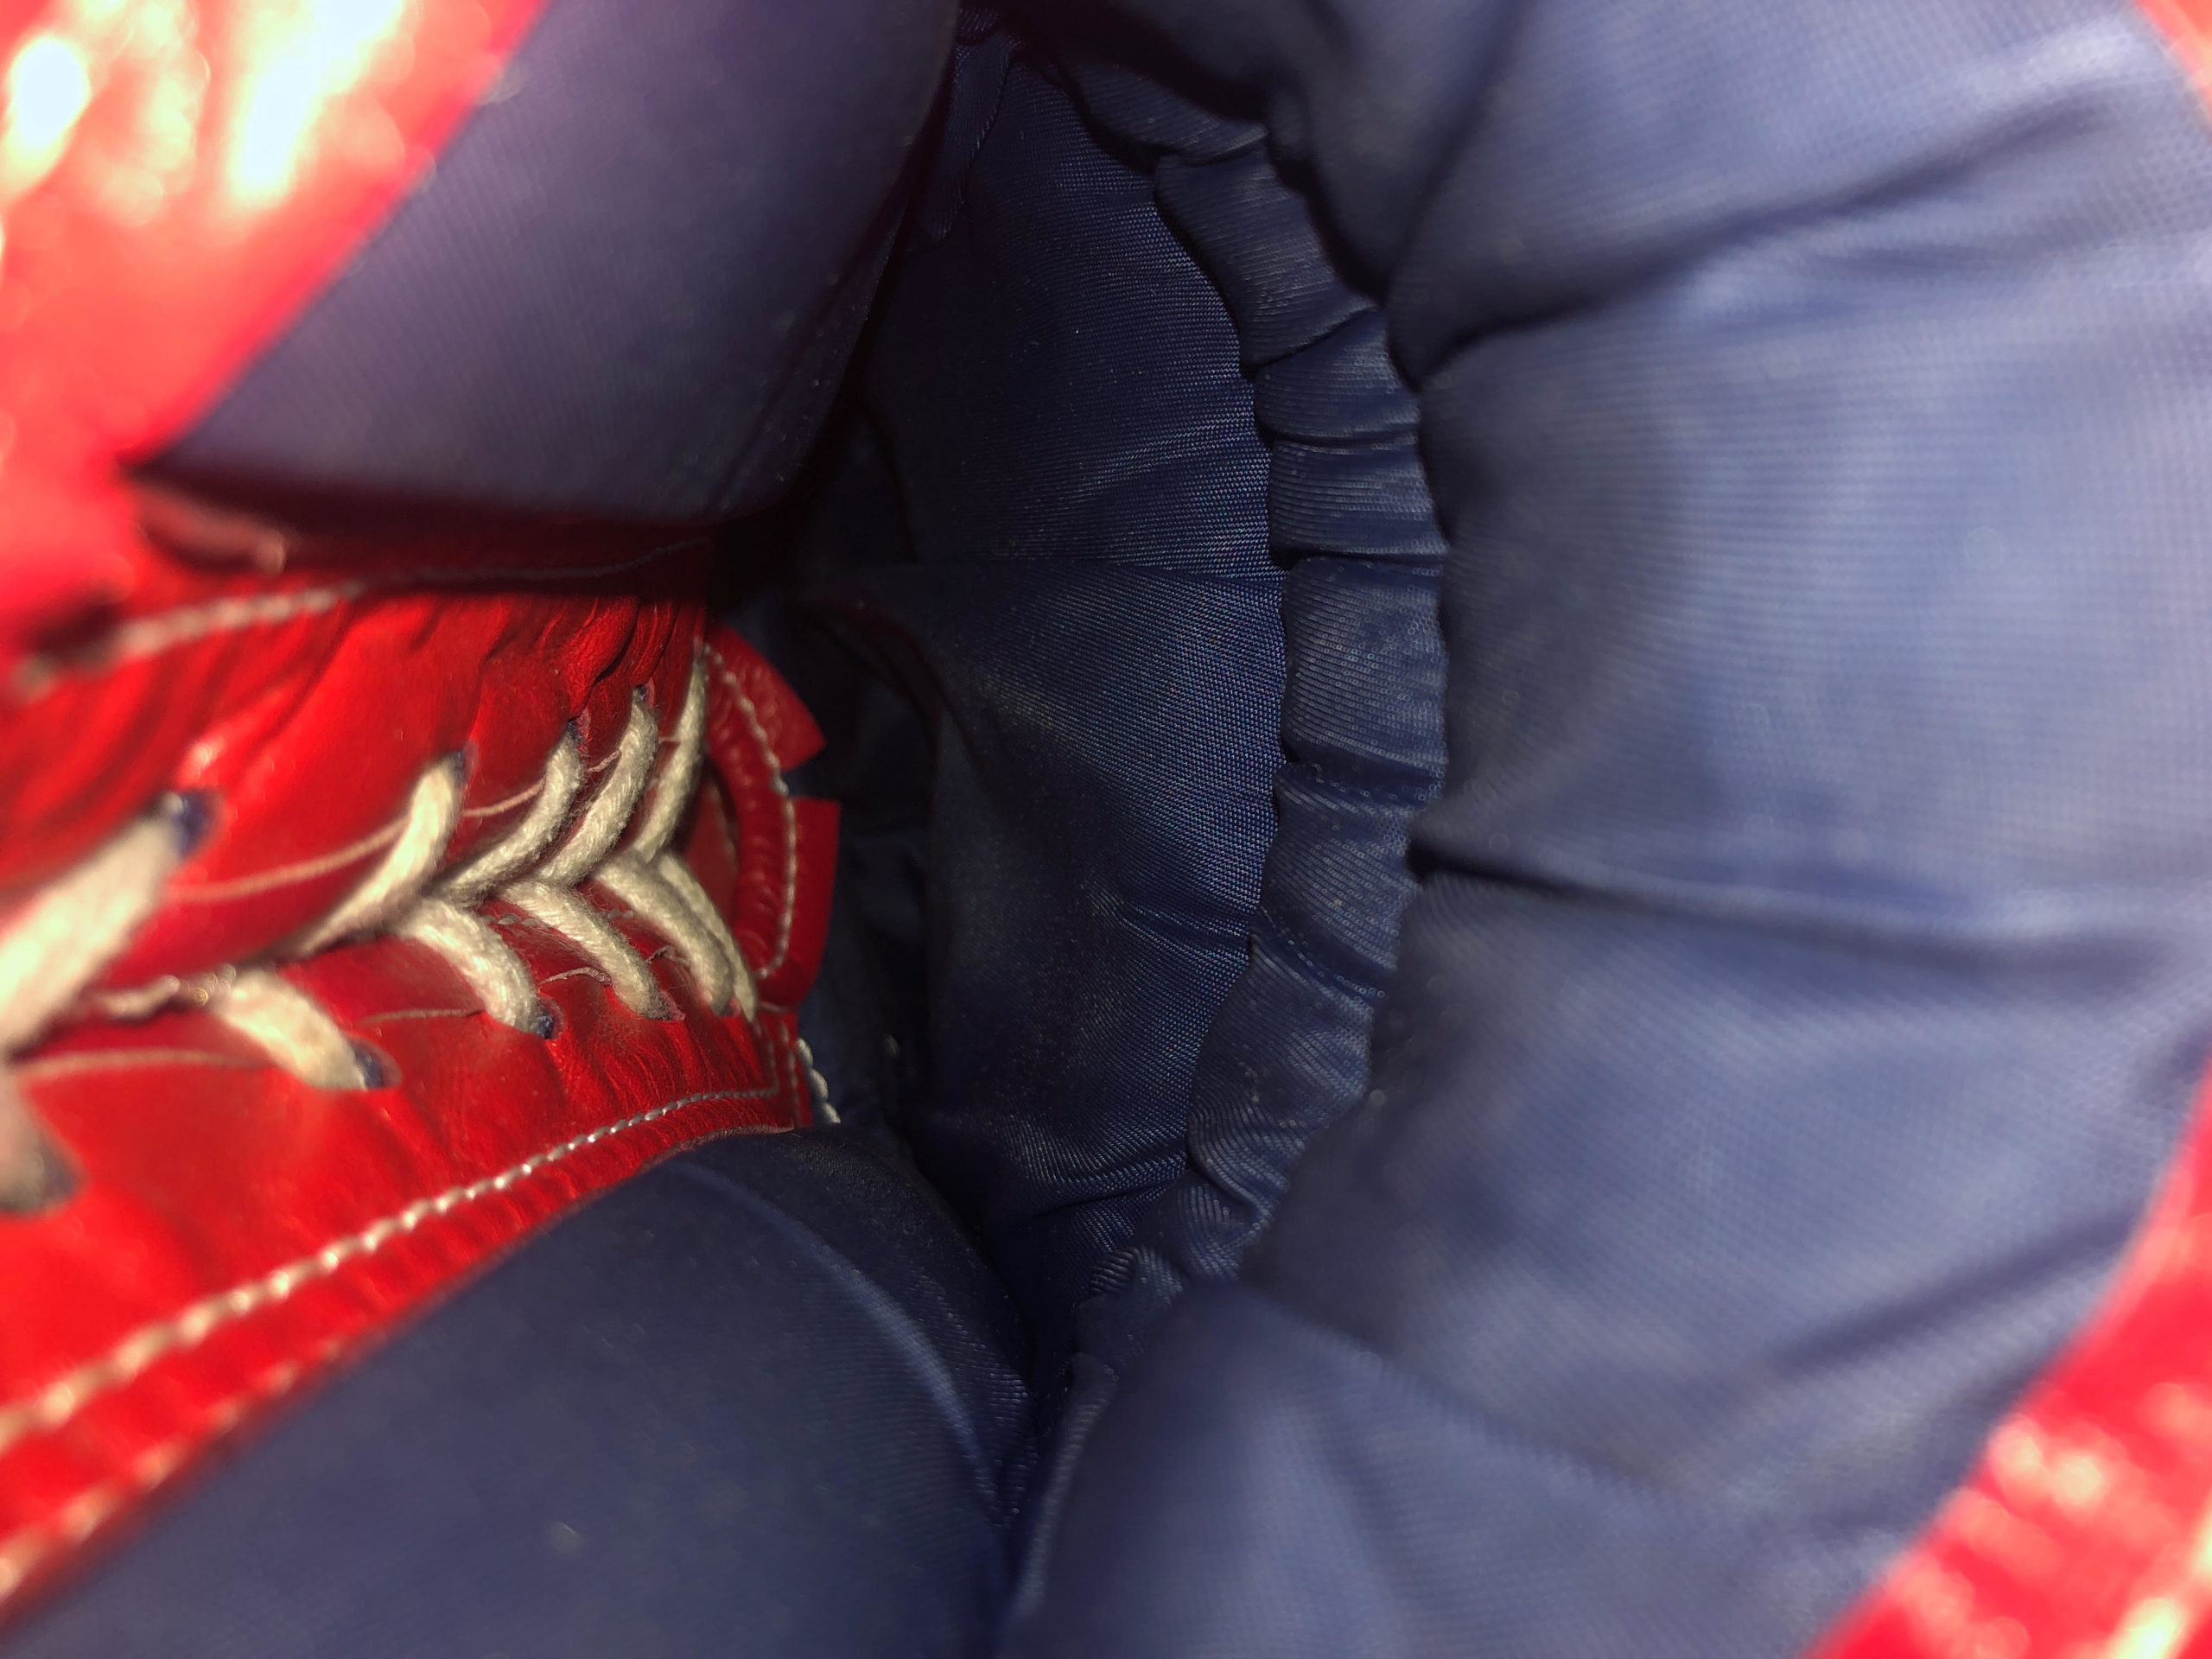 Extreme close up photo of the inside of a boxing glove with red and blue fabric and laces.